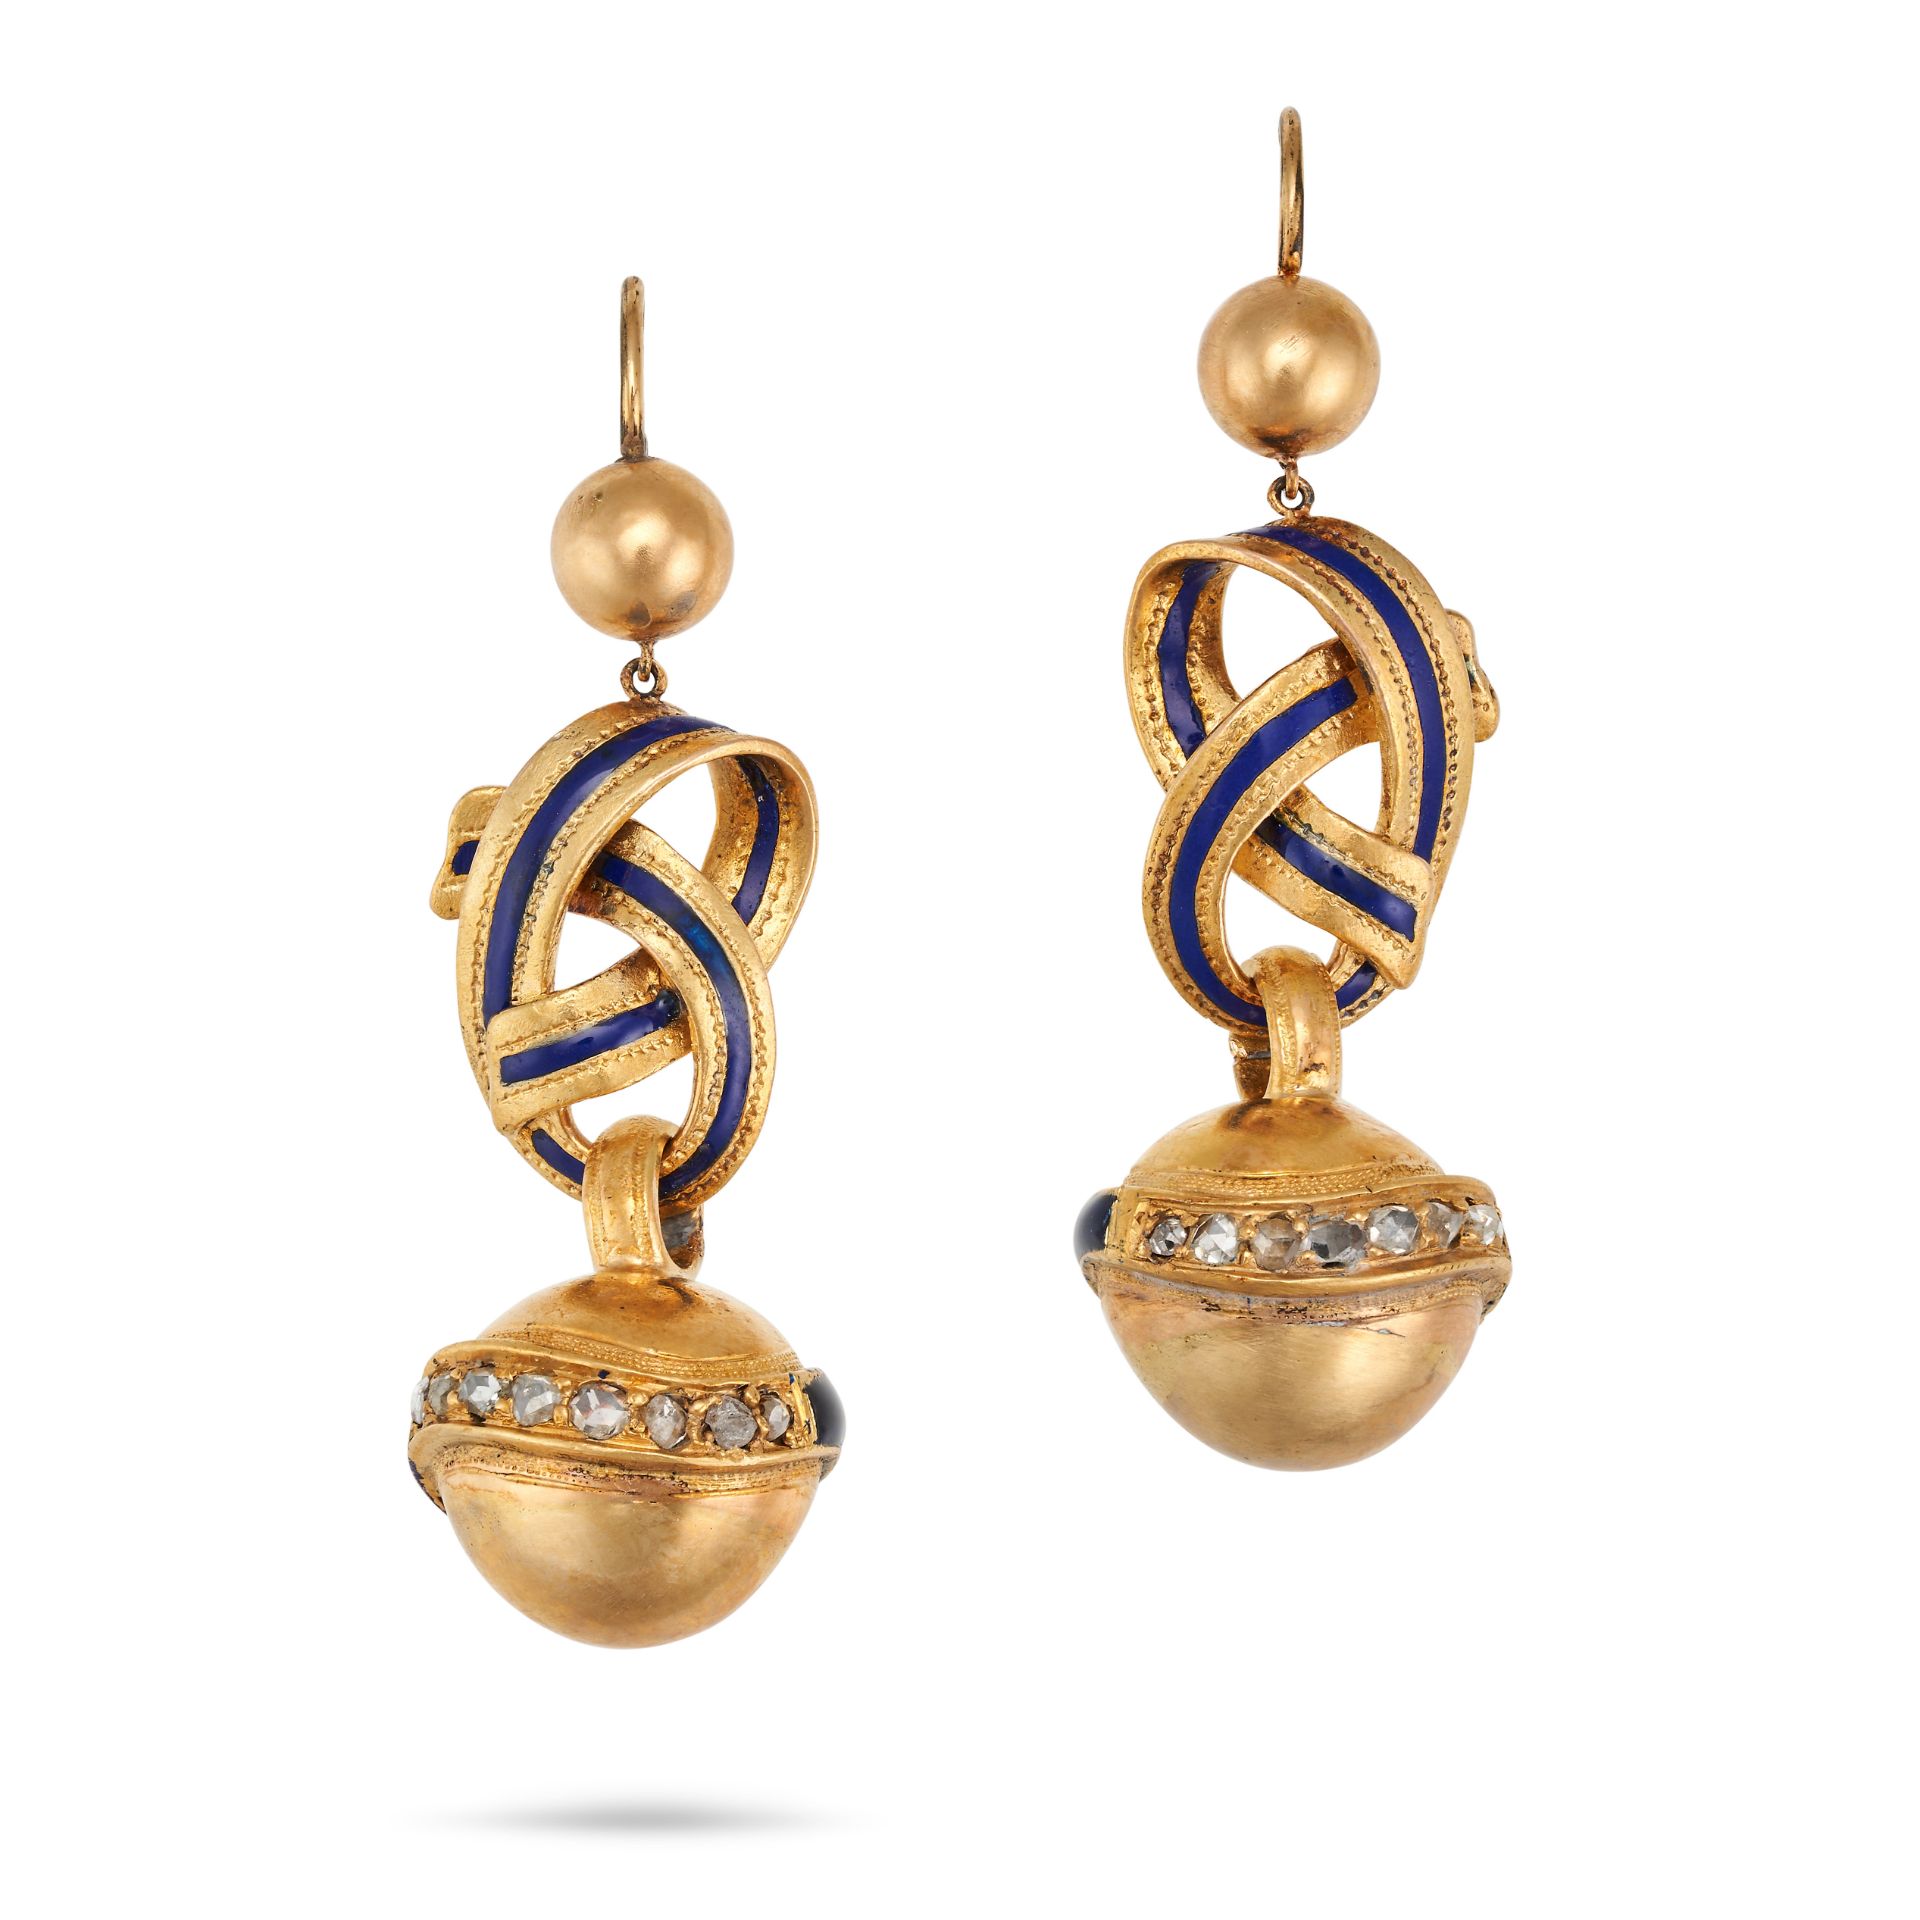 A PAIR OF ANTIQUE DIAMOND AND ENAMEL LOVER'S KNOT EARRINGS in yellow gold, each designed as a lov...